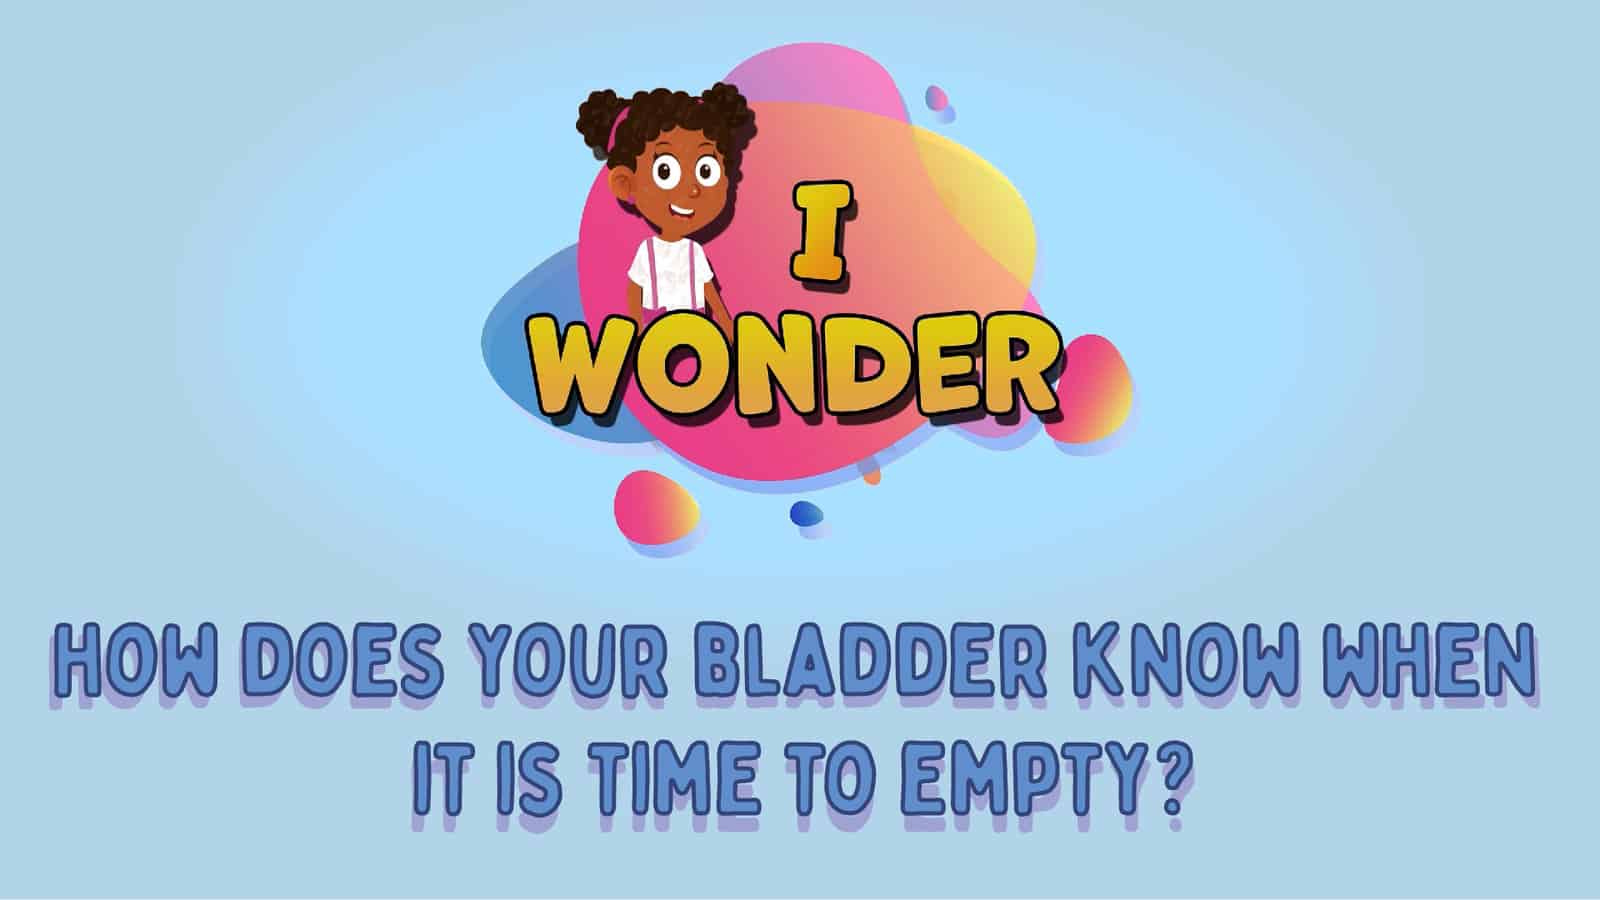 How Does Your Bladder Know When It Is Time To Empty?